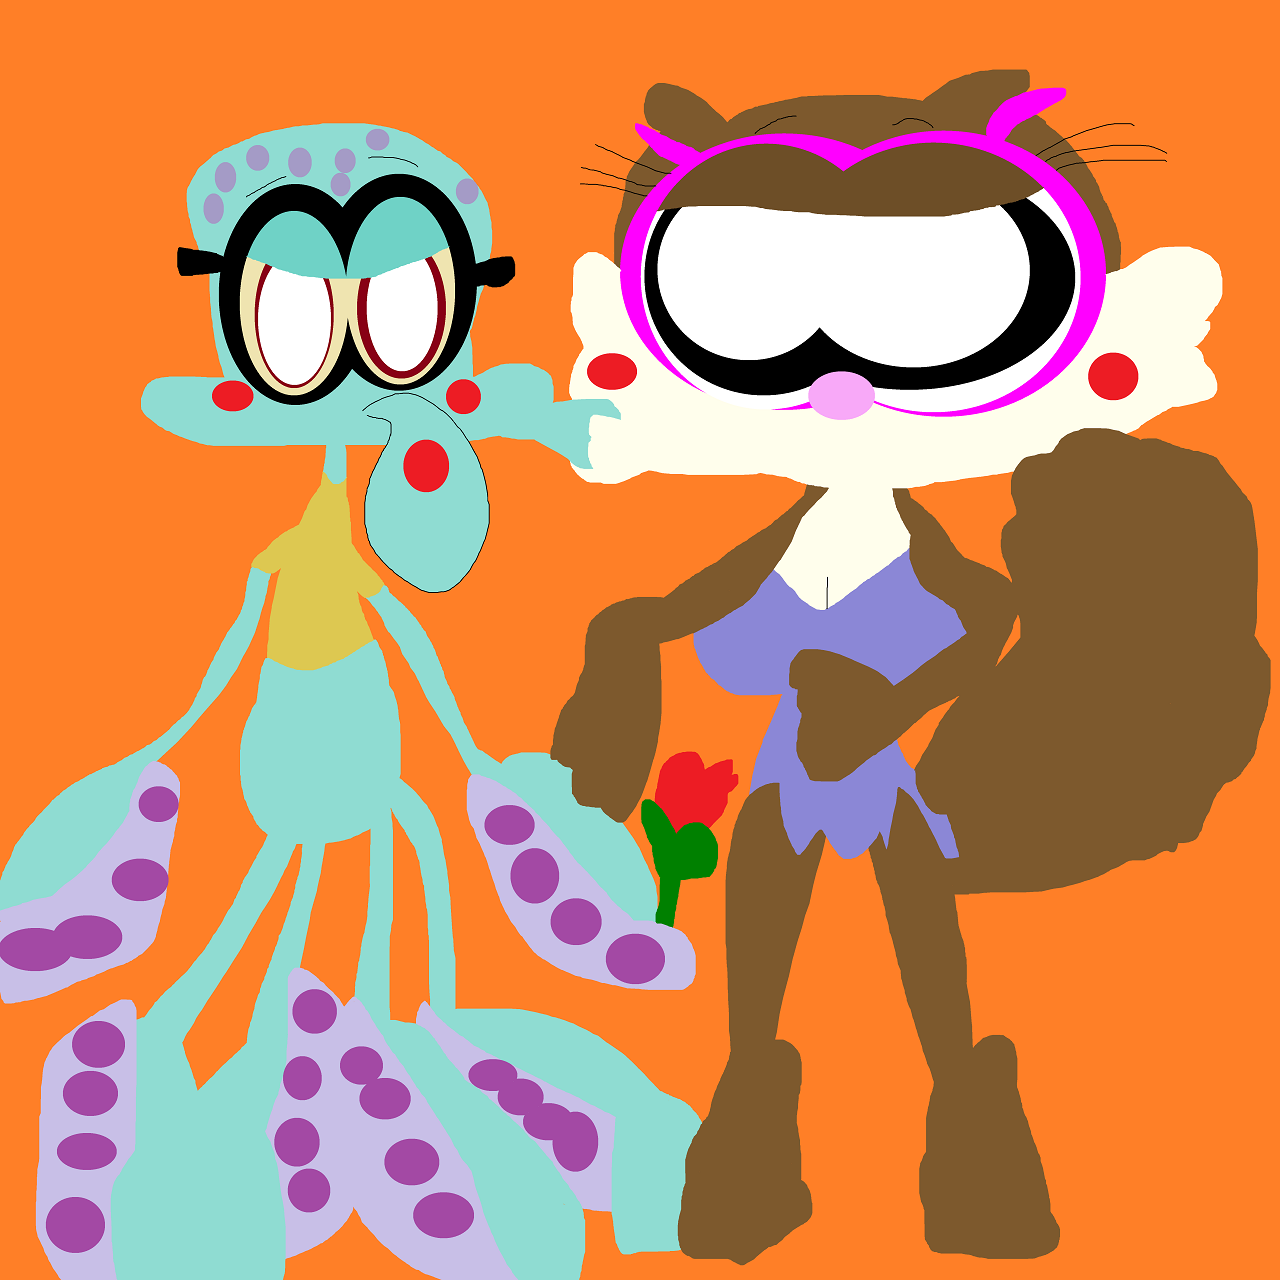 Squidward And Sandy On A Date Mix Of Show Styles Alt by Falconlobo